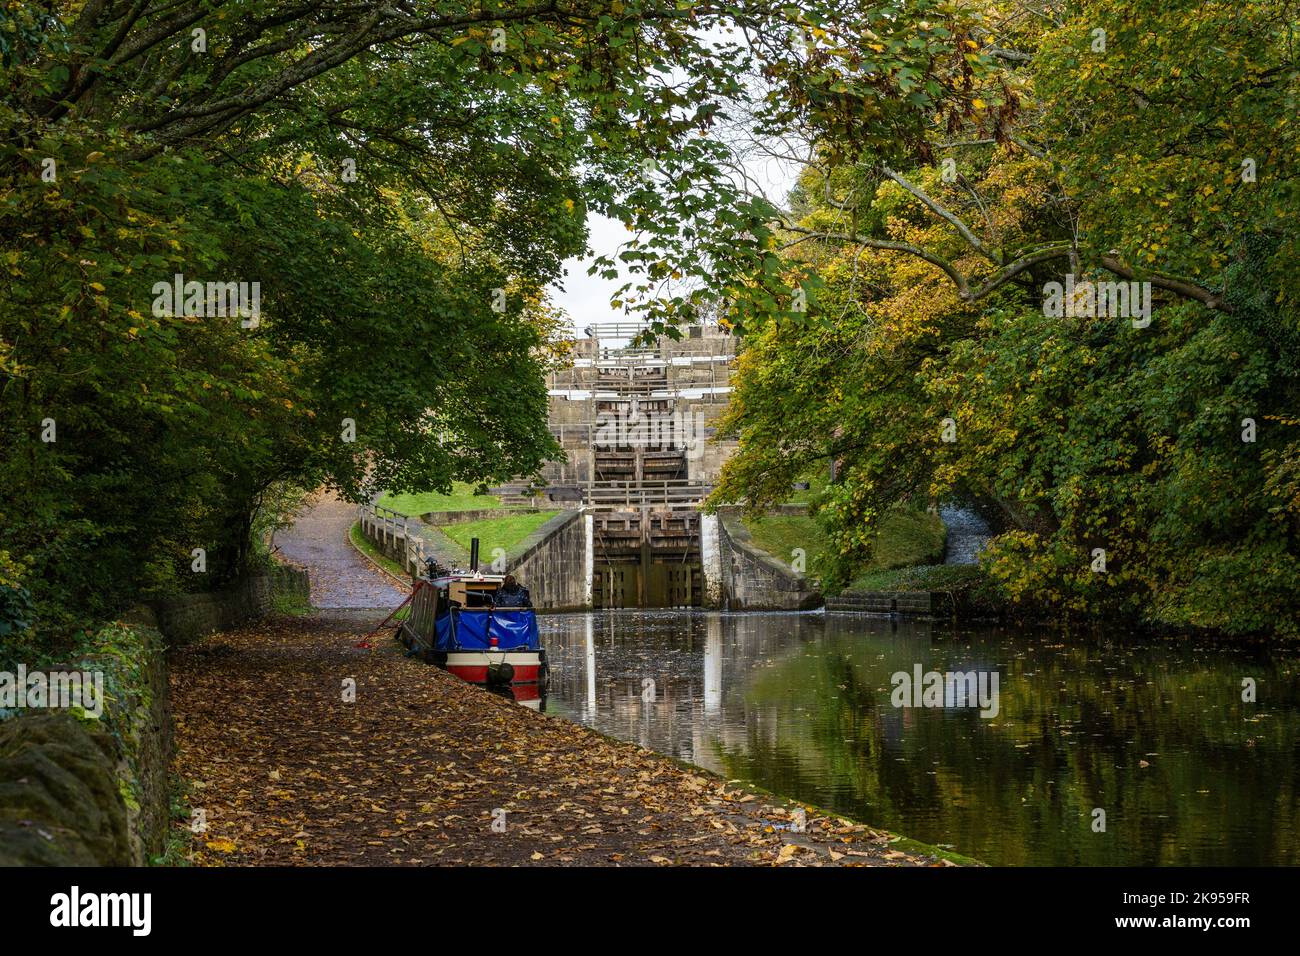 A barge (narrowboat) is moored up at the side of the Leeds Liverpool canal below Five Rise Locks (Staircase lock)  in Bingley, West Yorkshire. Stock Photo